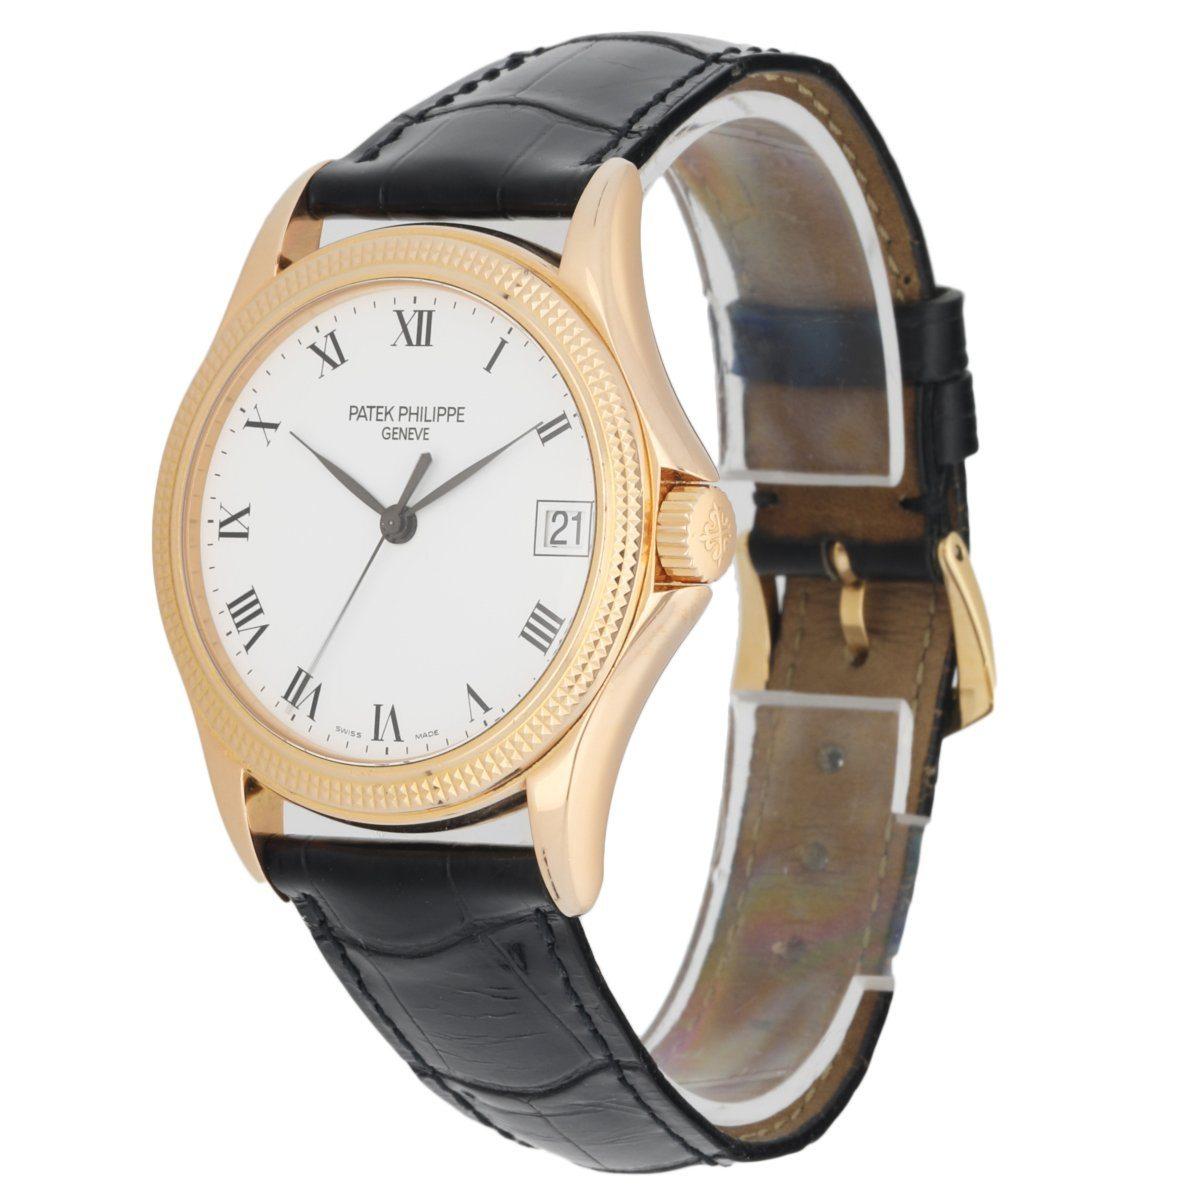 Patek Philippe Calatrava 5117R Men's Watch. 36mm 18K rose gold case with 18KÂ rose gold Hobnail patterned bezel. White dial with black steel hands and black Roman numeral hour markers. Date display at 3 o'clock position. Black Alligator Leather